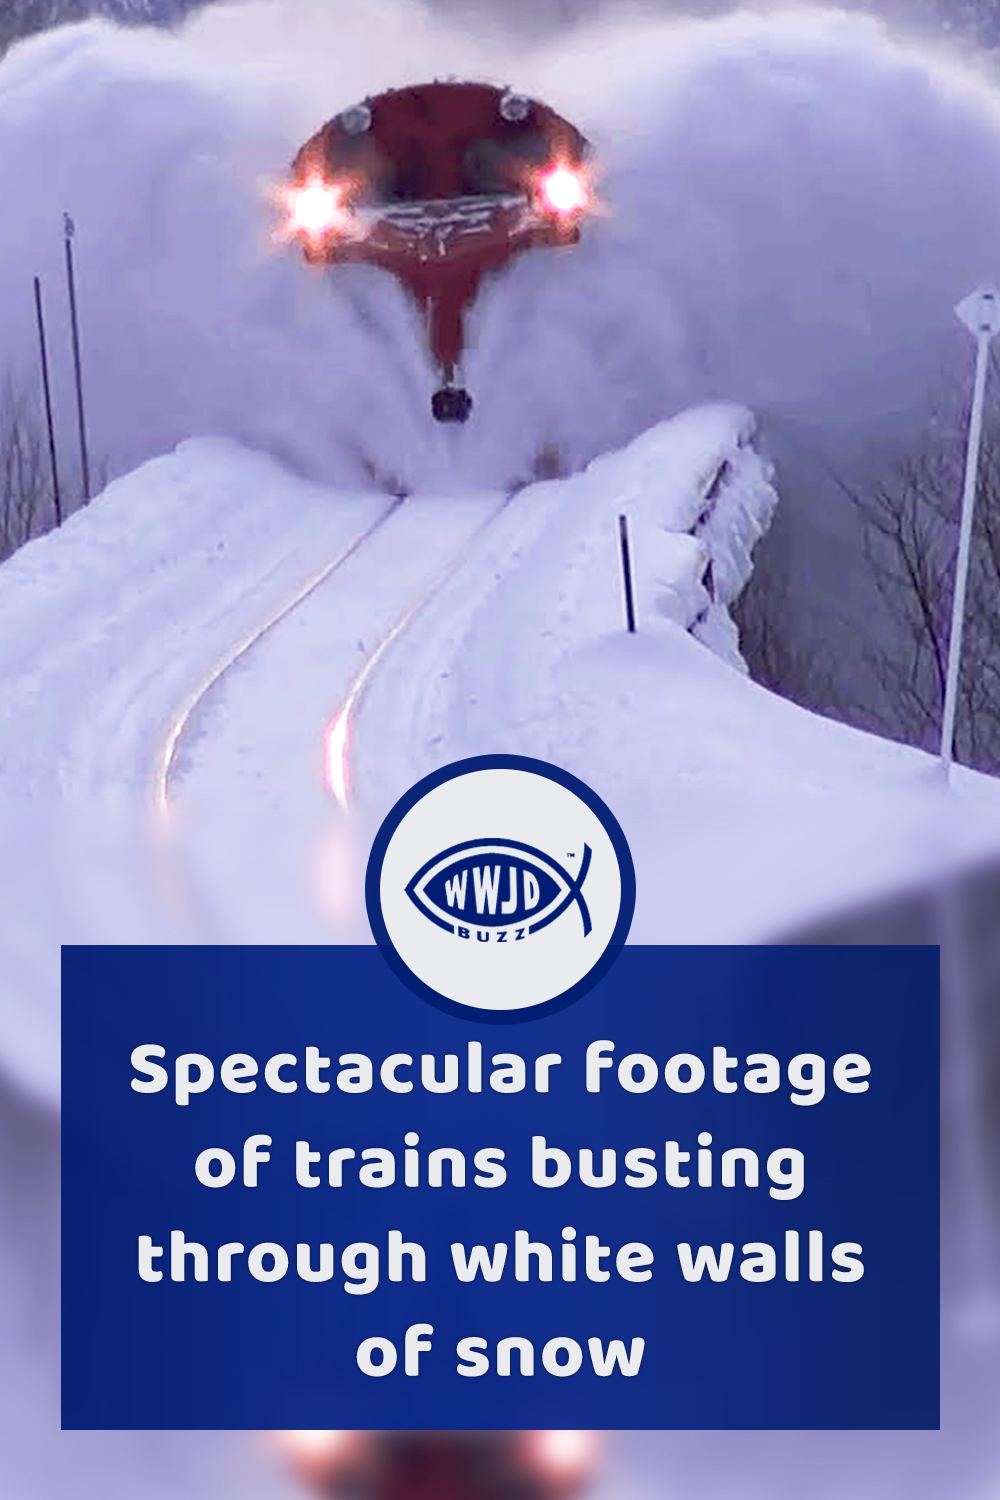 Spectacular footage of trains busting through white walls of snow